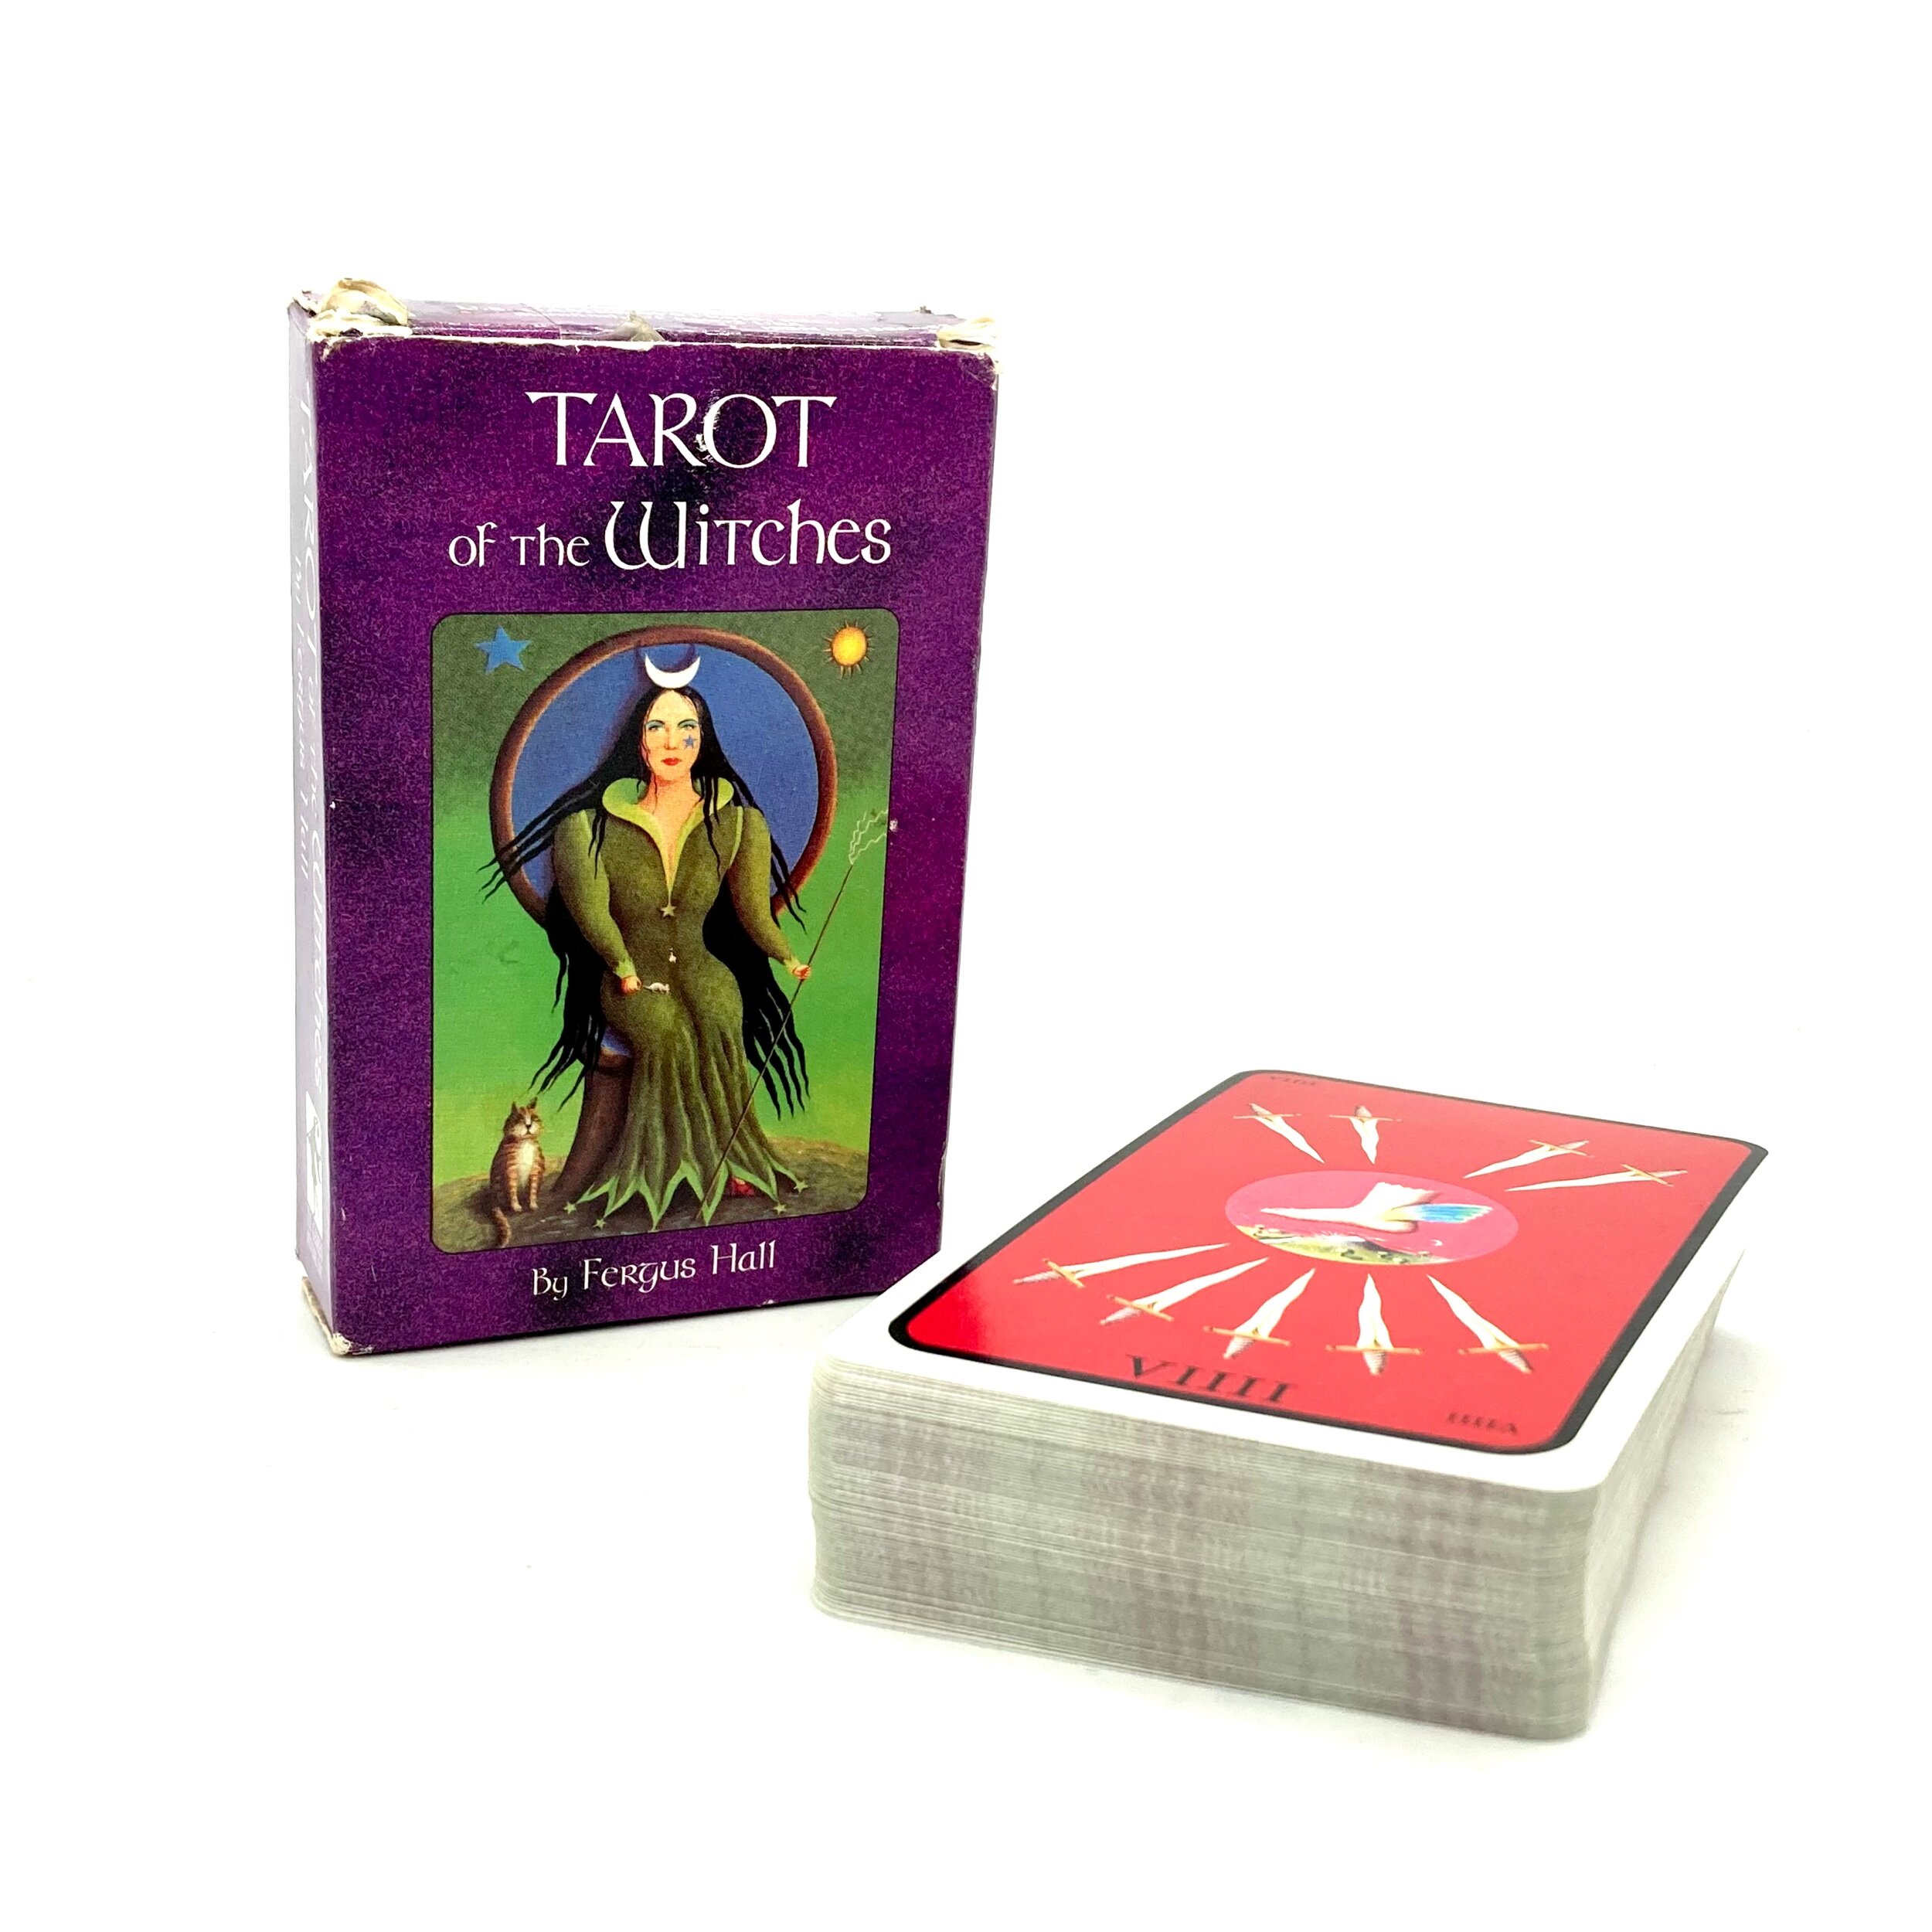 "Tarot of Witches" by Fergus Hall [US Games Systems, 2001] — Bookstore